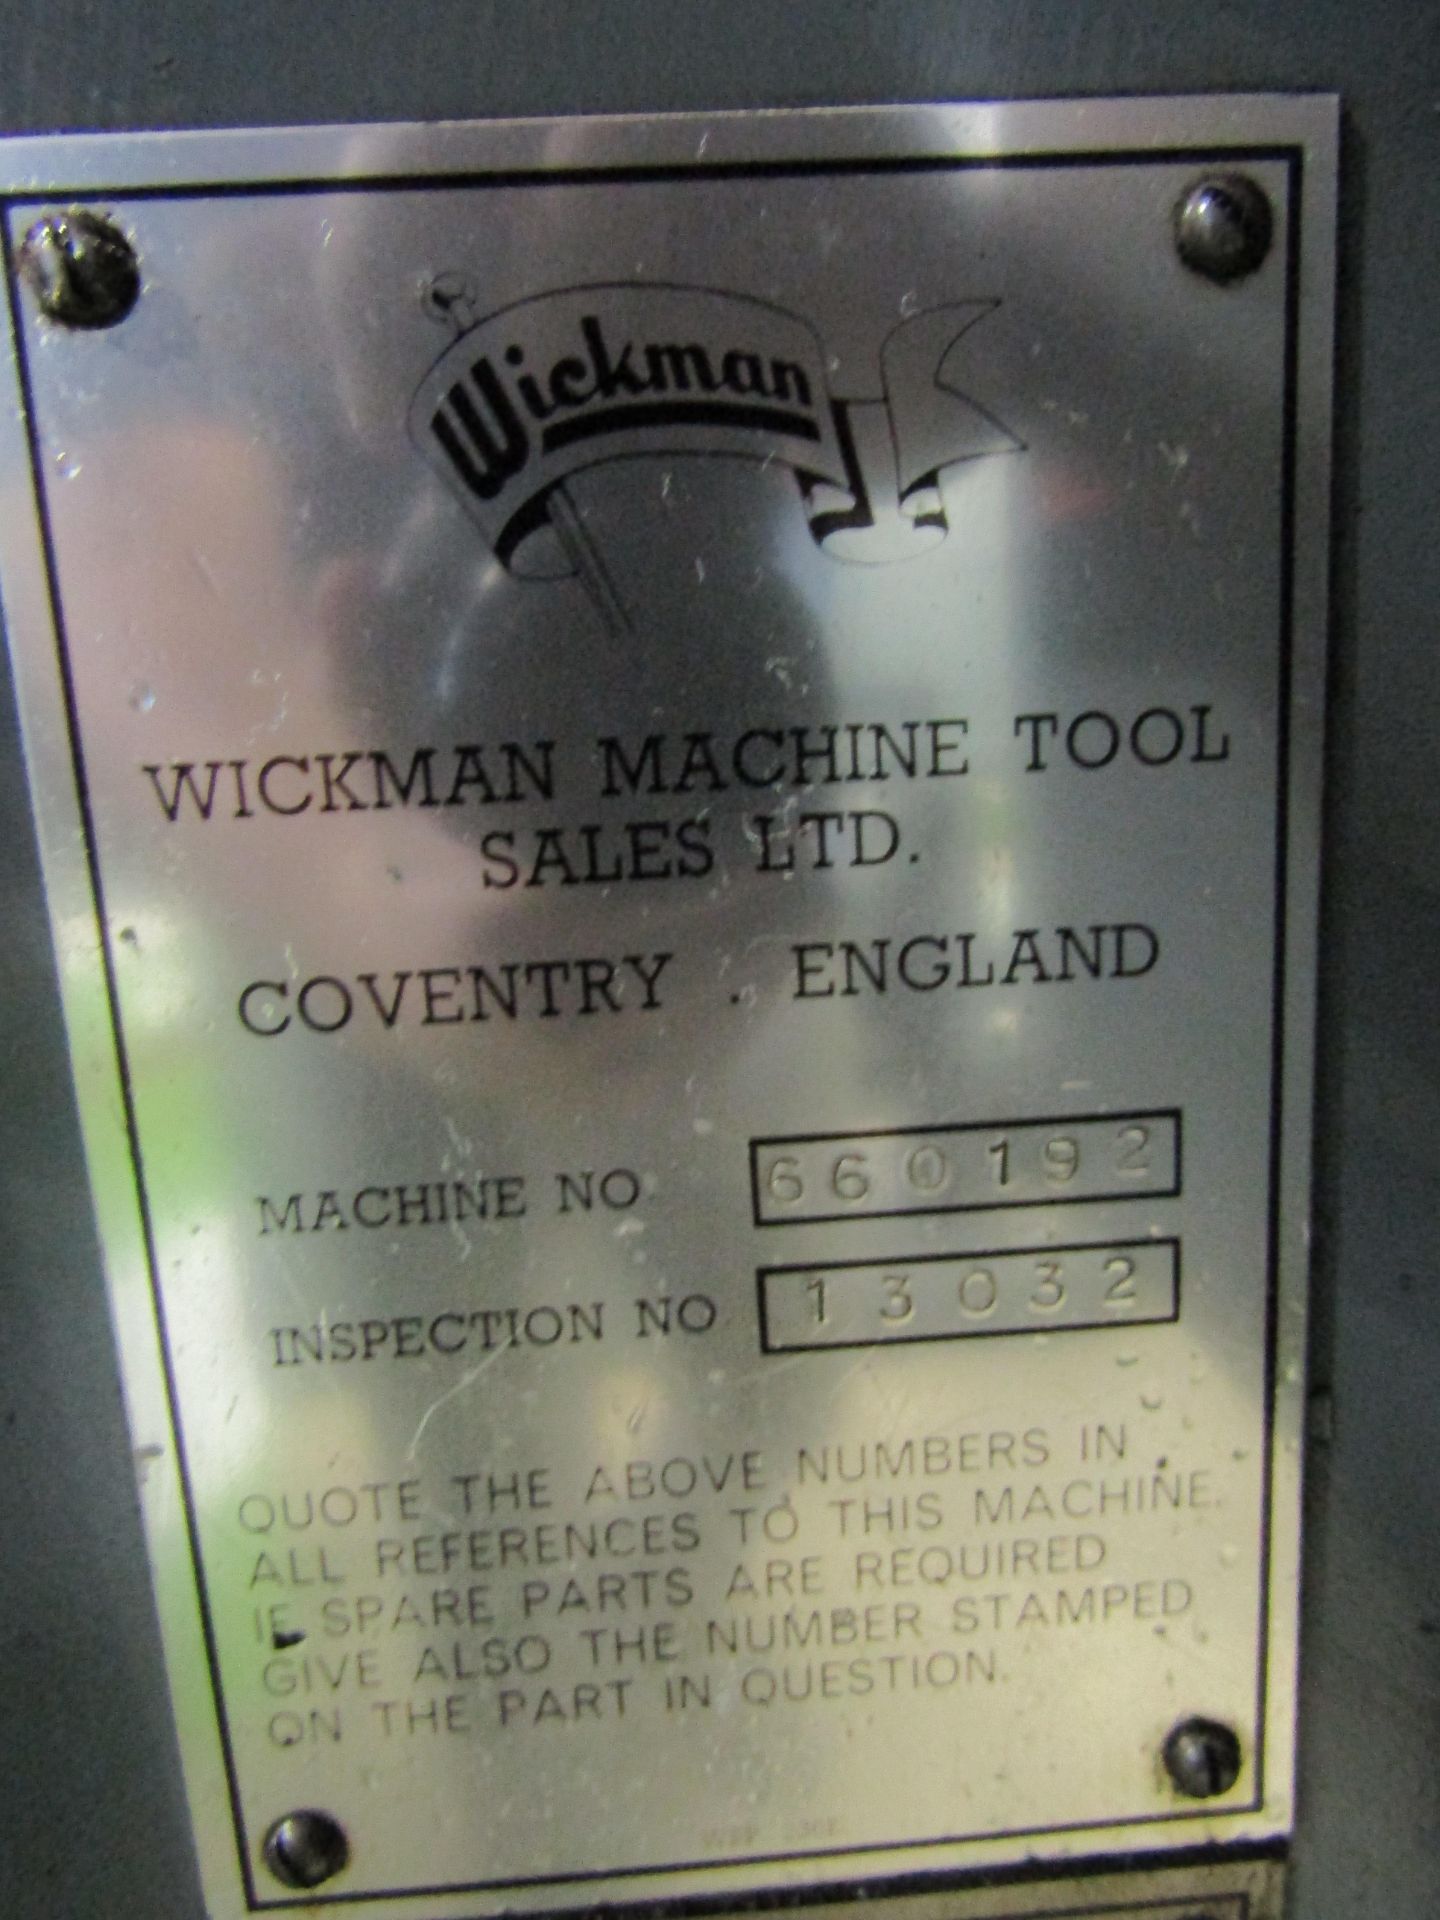 WICKMAN 6 SPINDLE AUTOMATIC SCREW MACHINE, 1 3/4", SERIAL 660192, INSPECTION 13032. LOT TO - Image 10 of 10